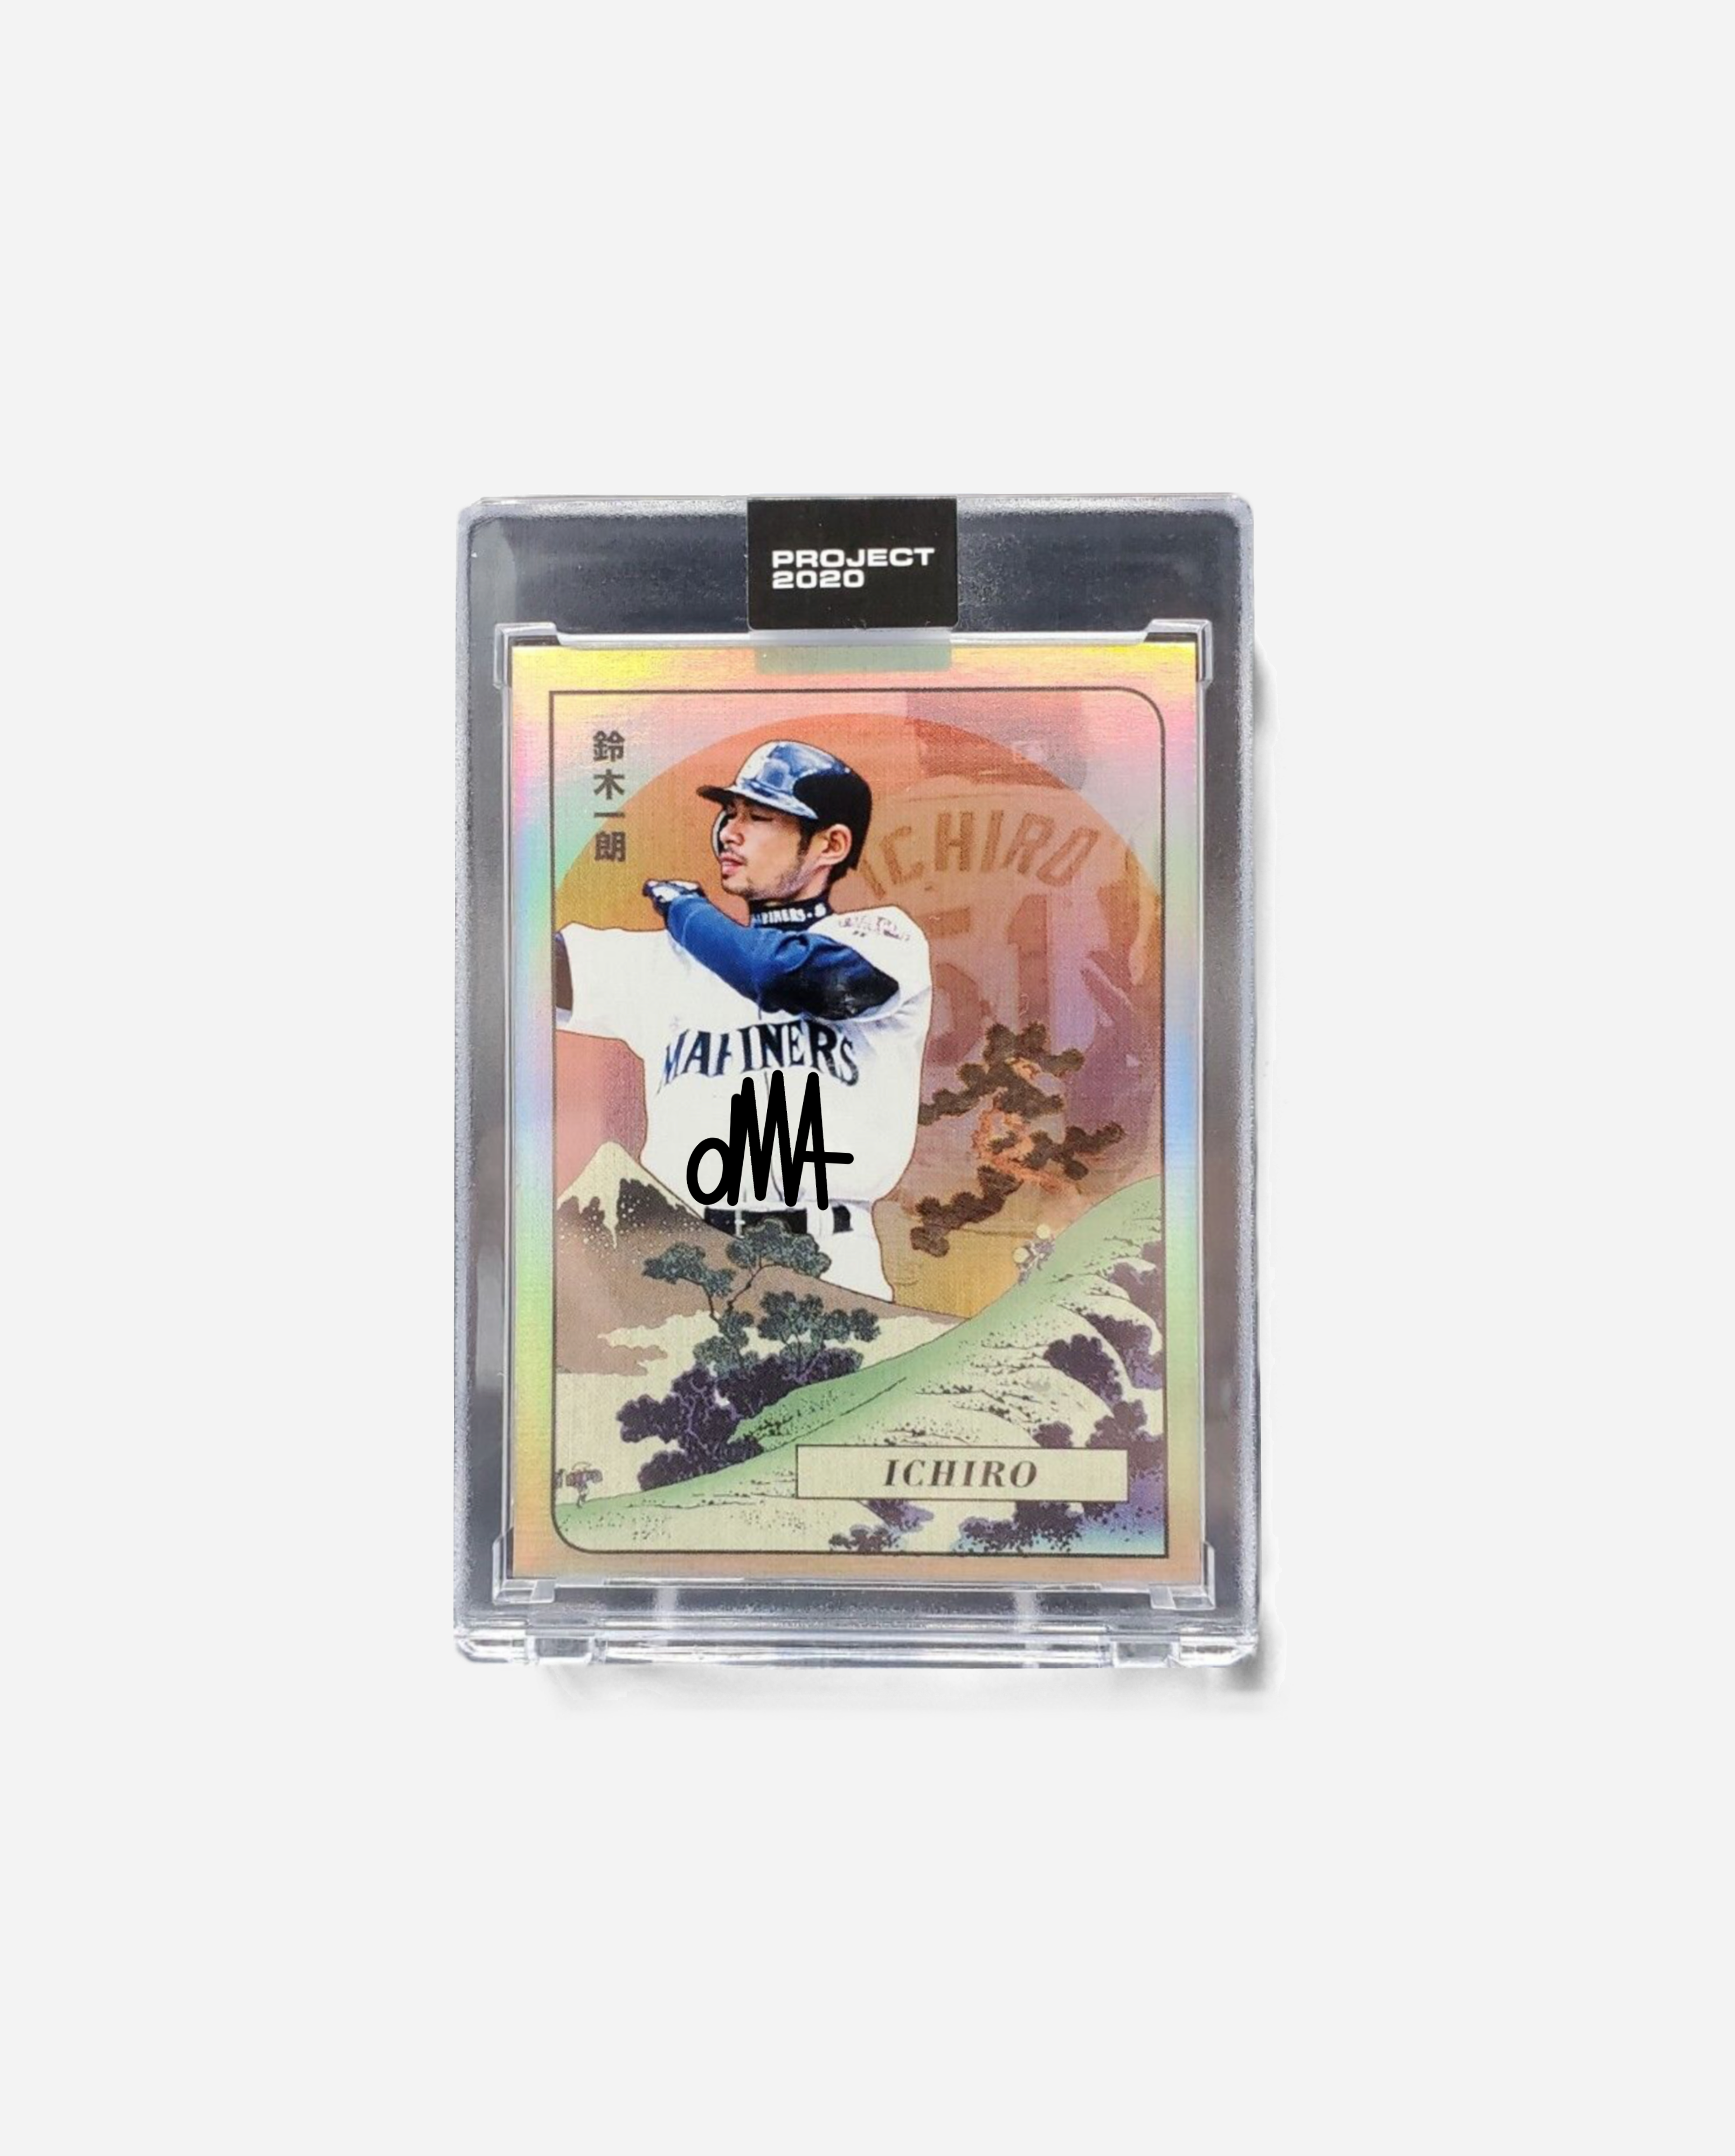 Ichiro x oMA x Topps Project 2020 Autographed Card (FOIL)